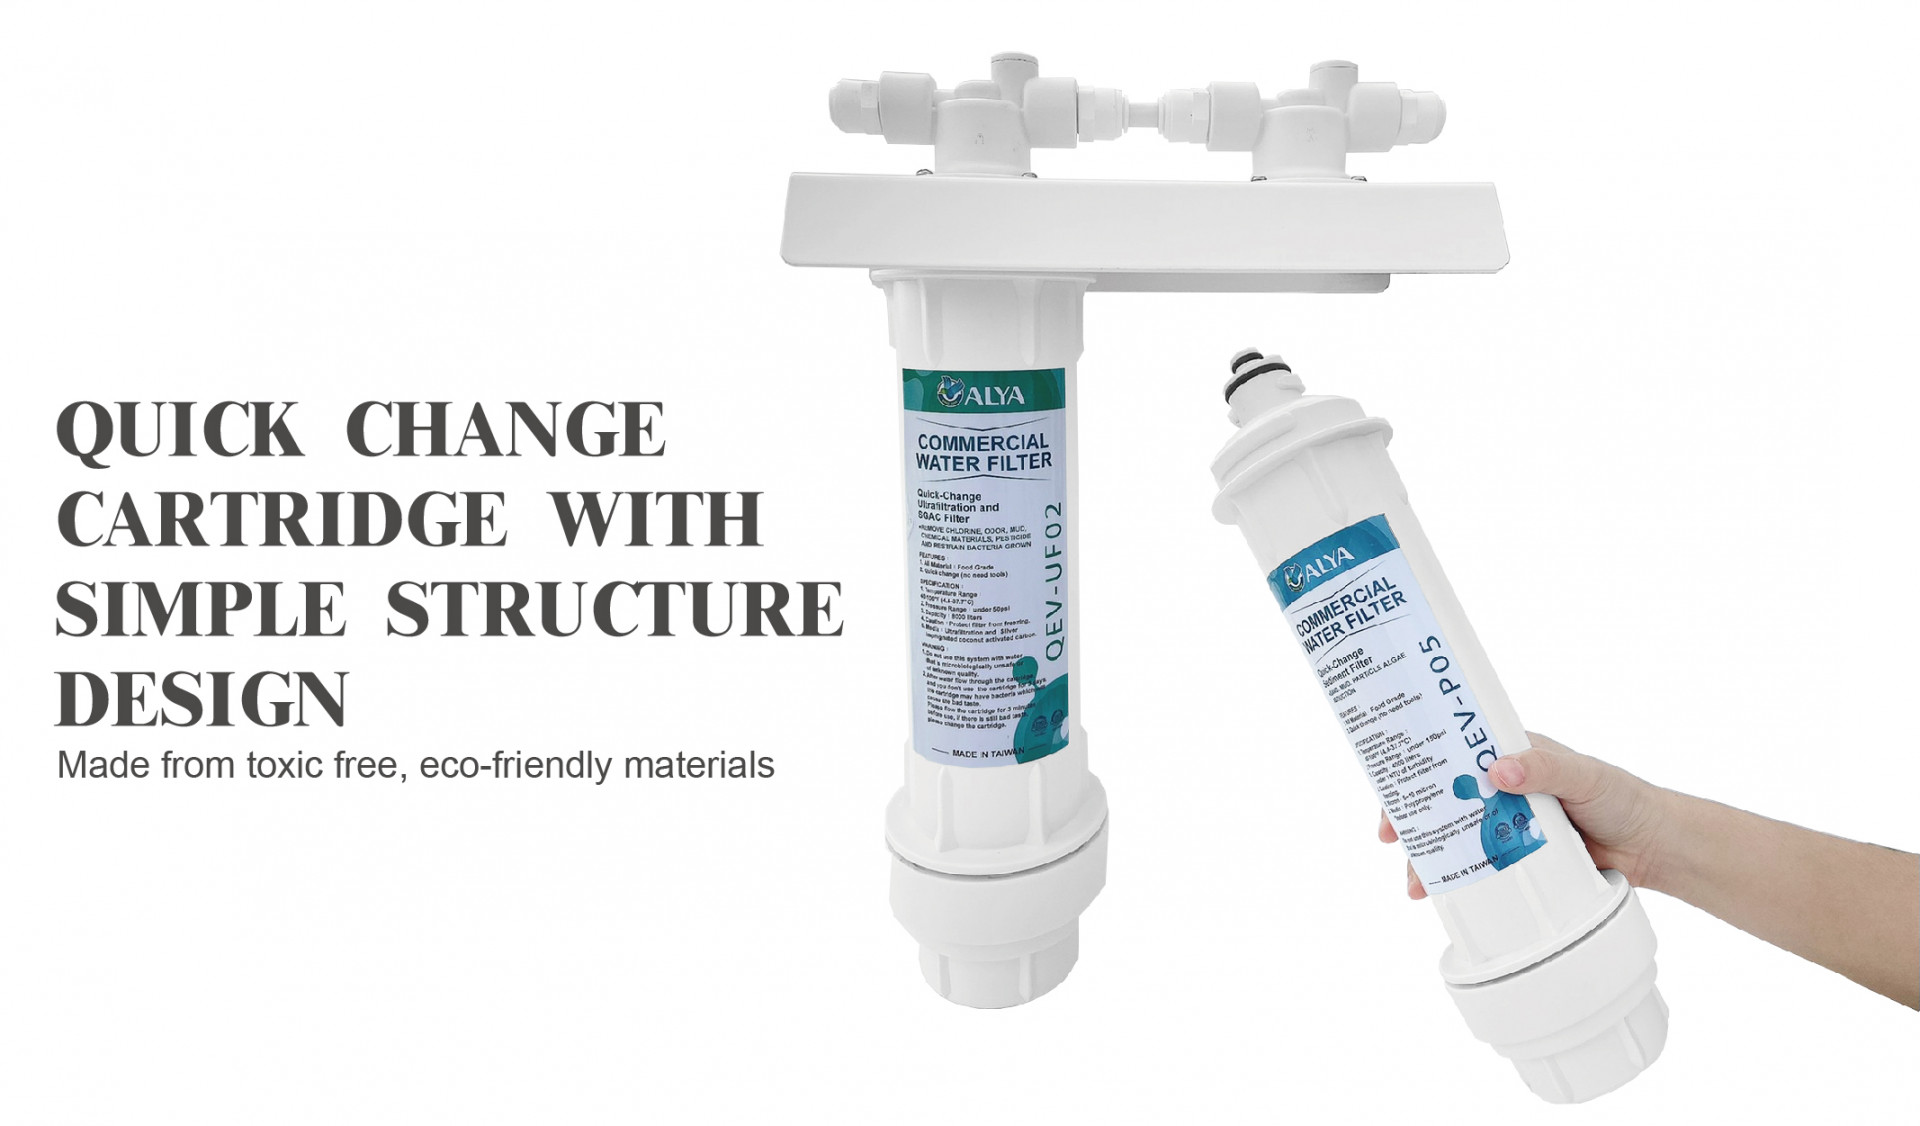 WATER PURIFIER QUICK CHANGE CARTRIDGE WITH SIMPLE STRUCTURE DESIGN